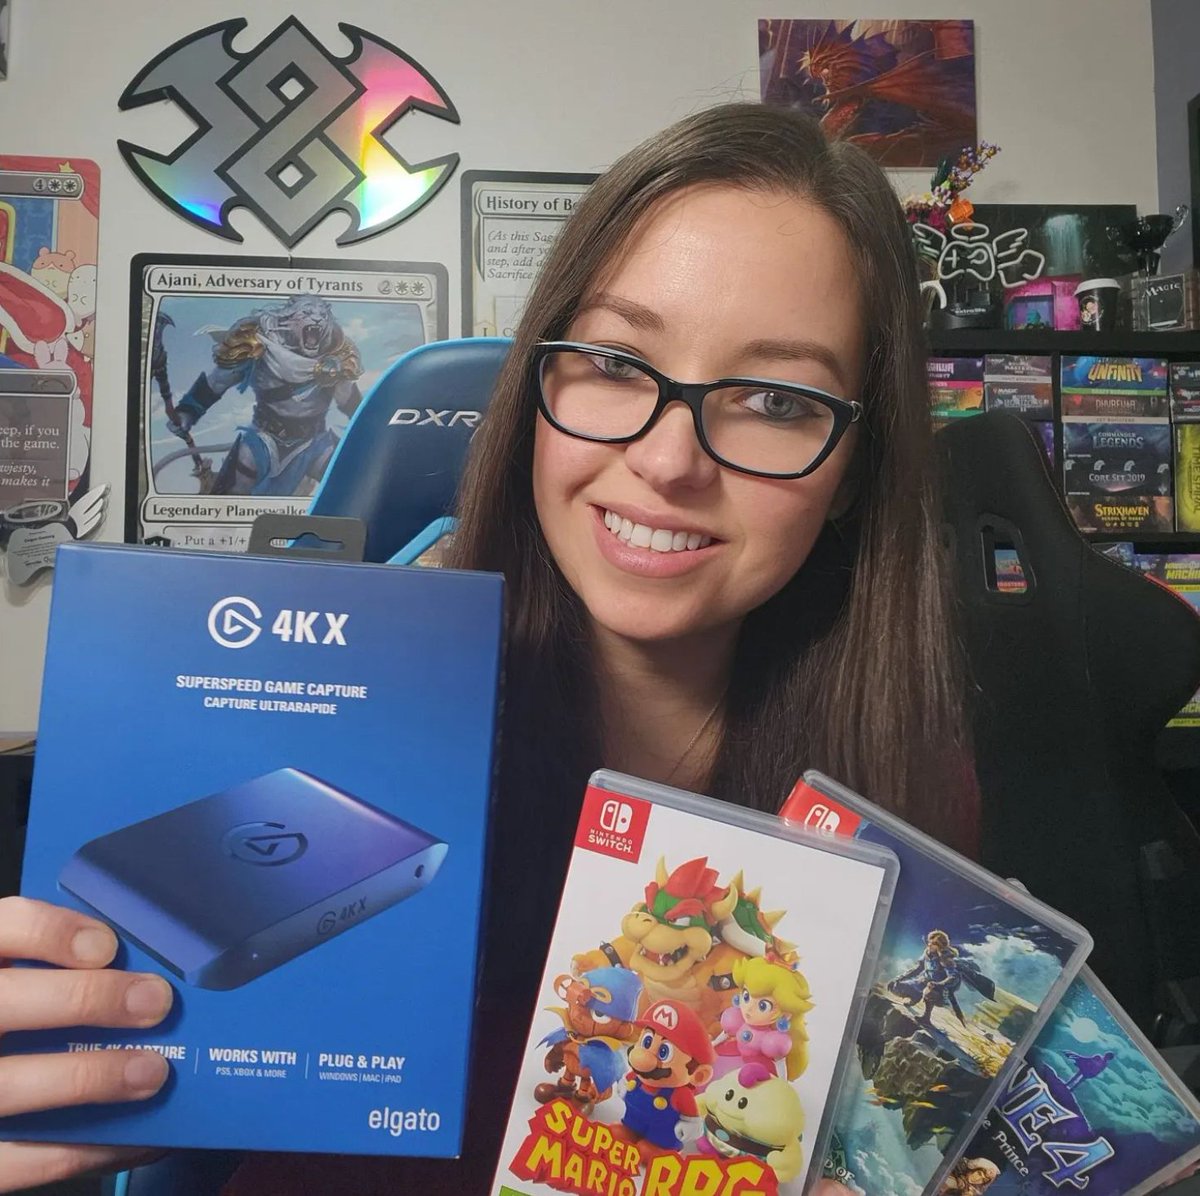 The Year of Variety continues today! Thanks to my sponsor @elgato I will be trying to beat 52 new games this year! This is ON TOP of my normal Magic content. You can support my Year of Variety quest by using code ZZ-MNG for 5% any Elgato product.🔥 ➡️elgato.sjv.io/MTGNerdGirl